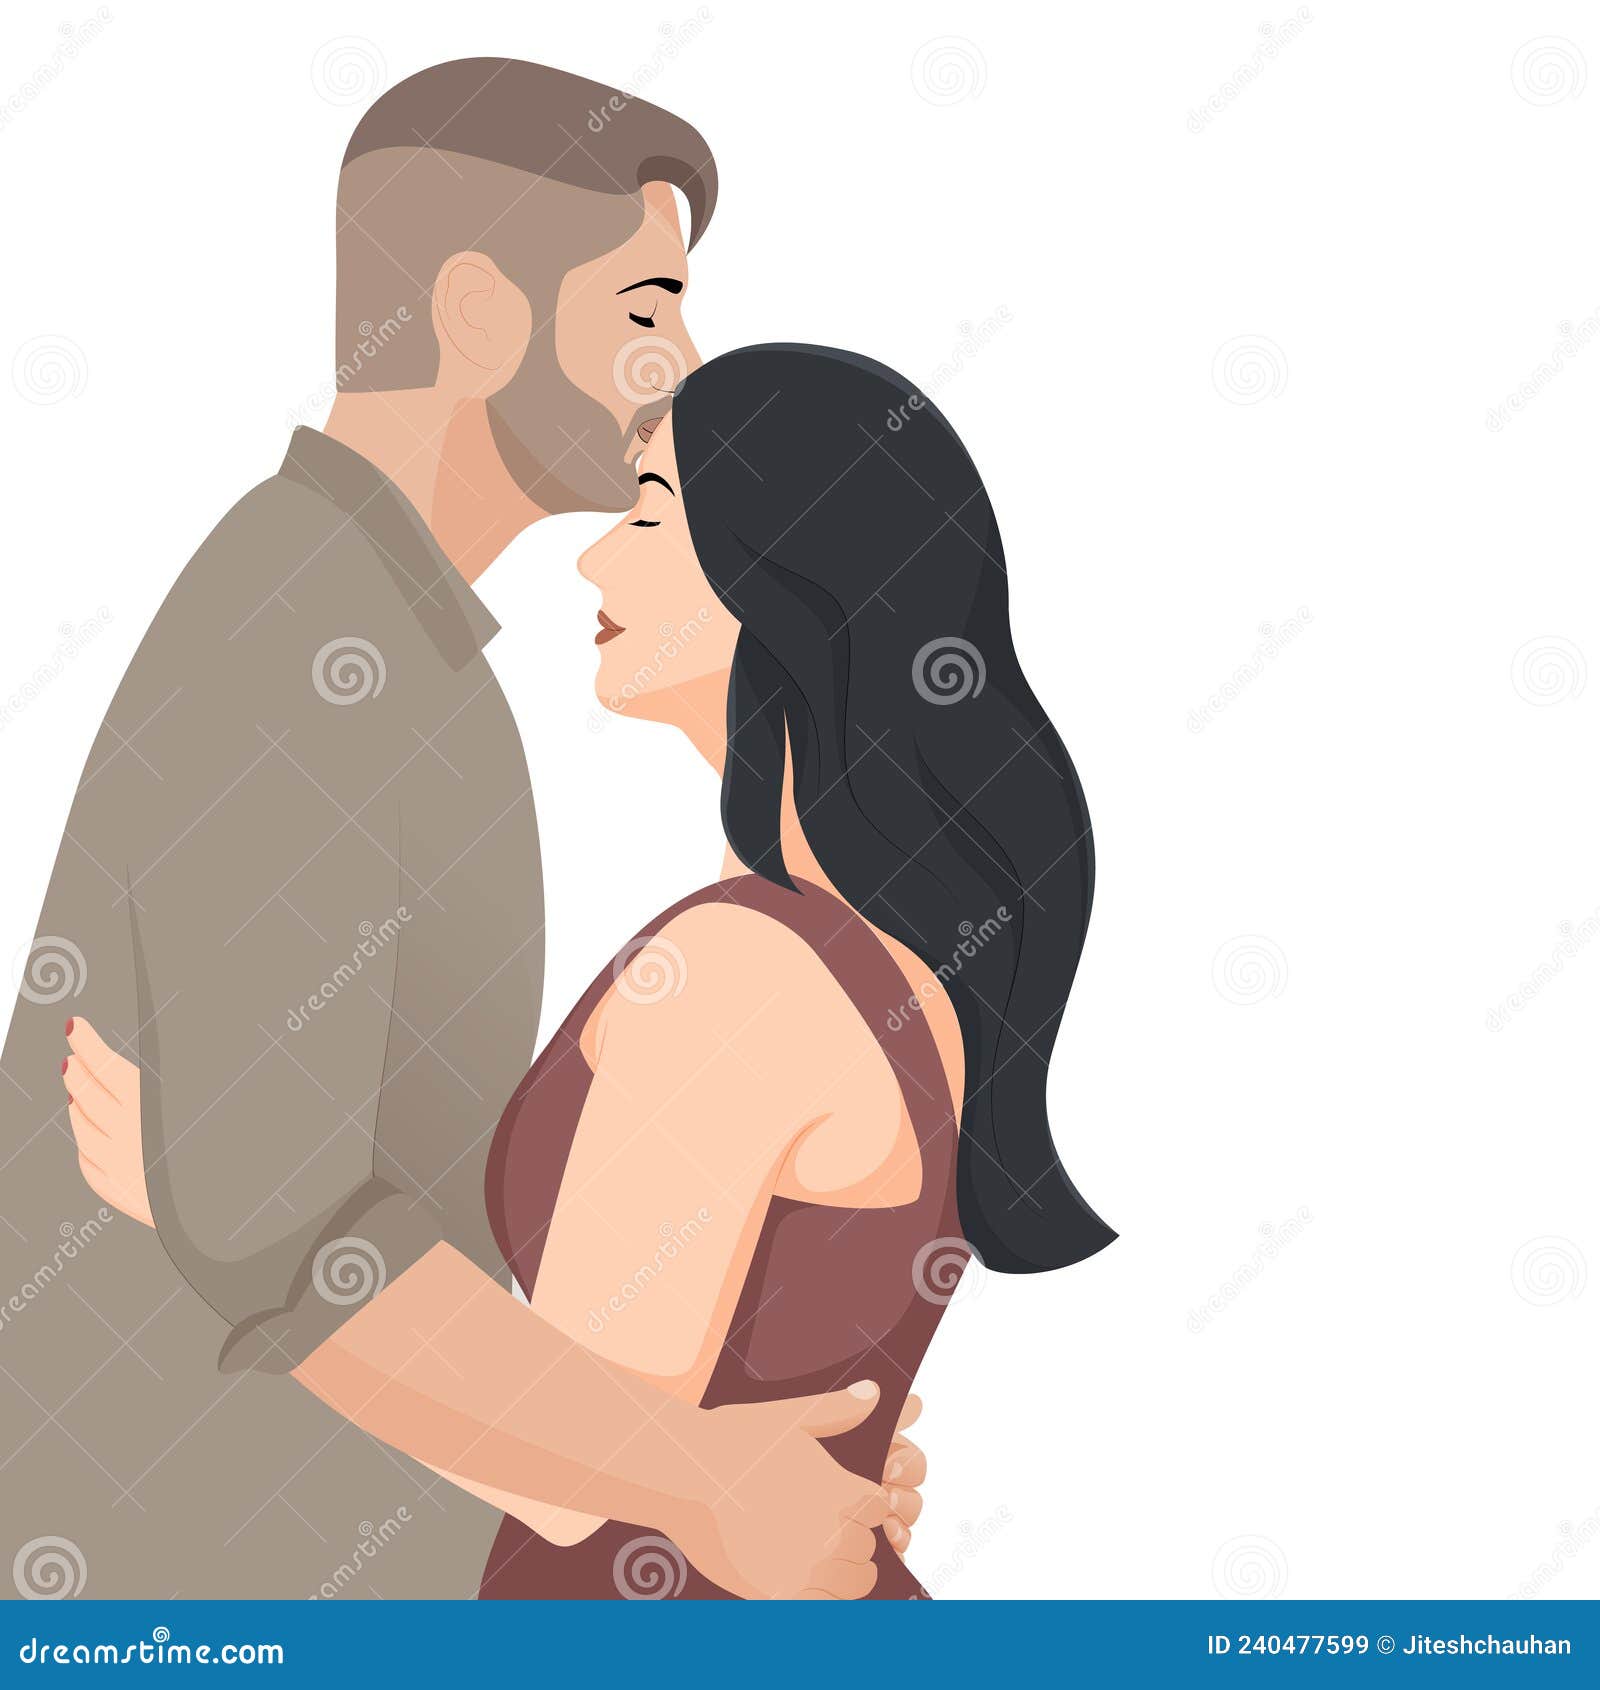 Forehead Kiss Line Art Drawing in Black and White